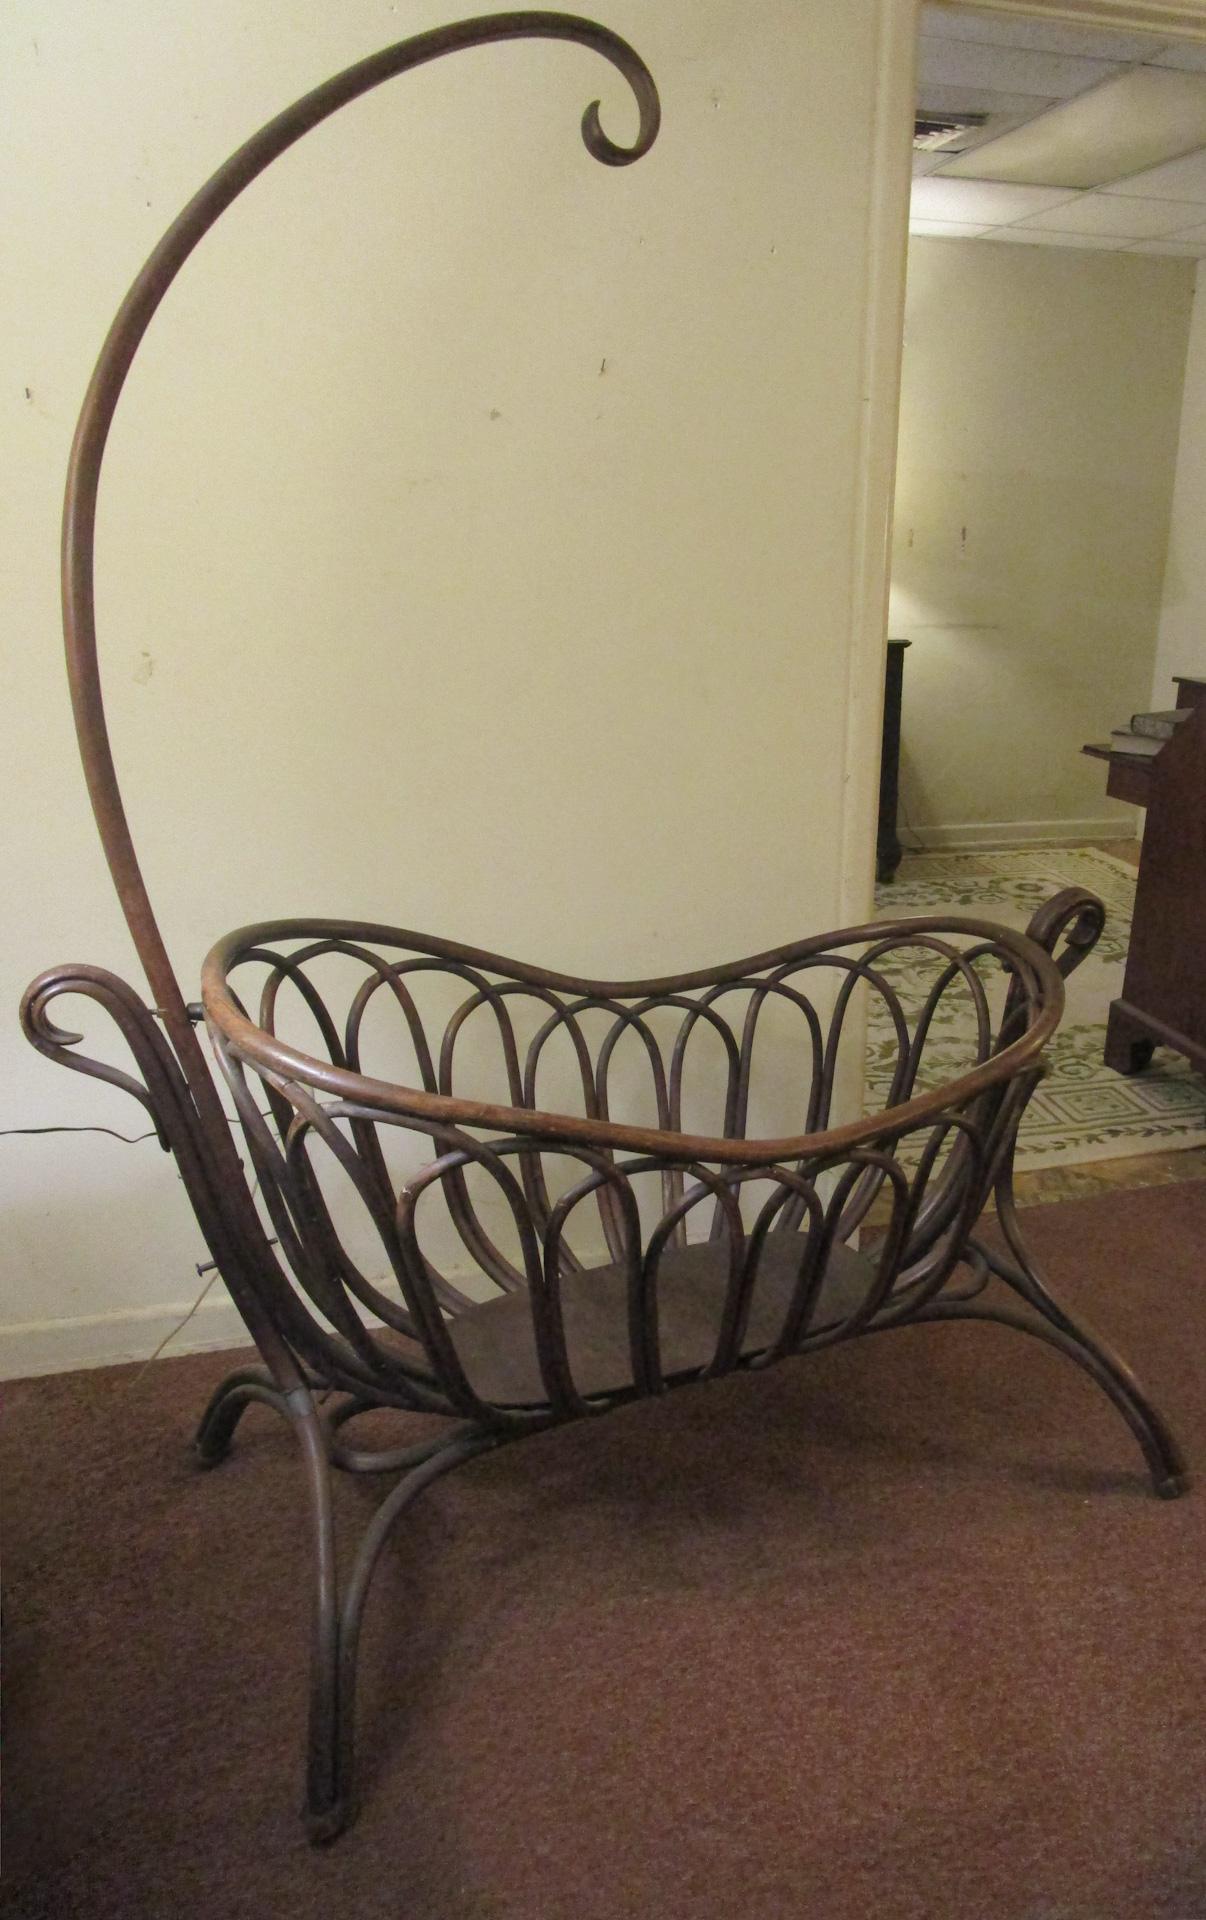 This very graceful French bentwood rocking cradle with canopy is from the Art Nouveau period (1890-1910) and is done in the style of the German-Austrian designer Michael Thonet who developed this type of furniture in order to make it appealing,